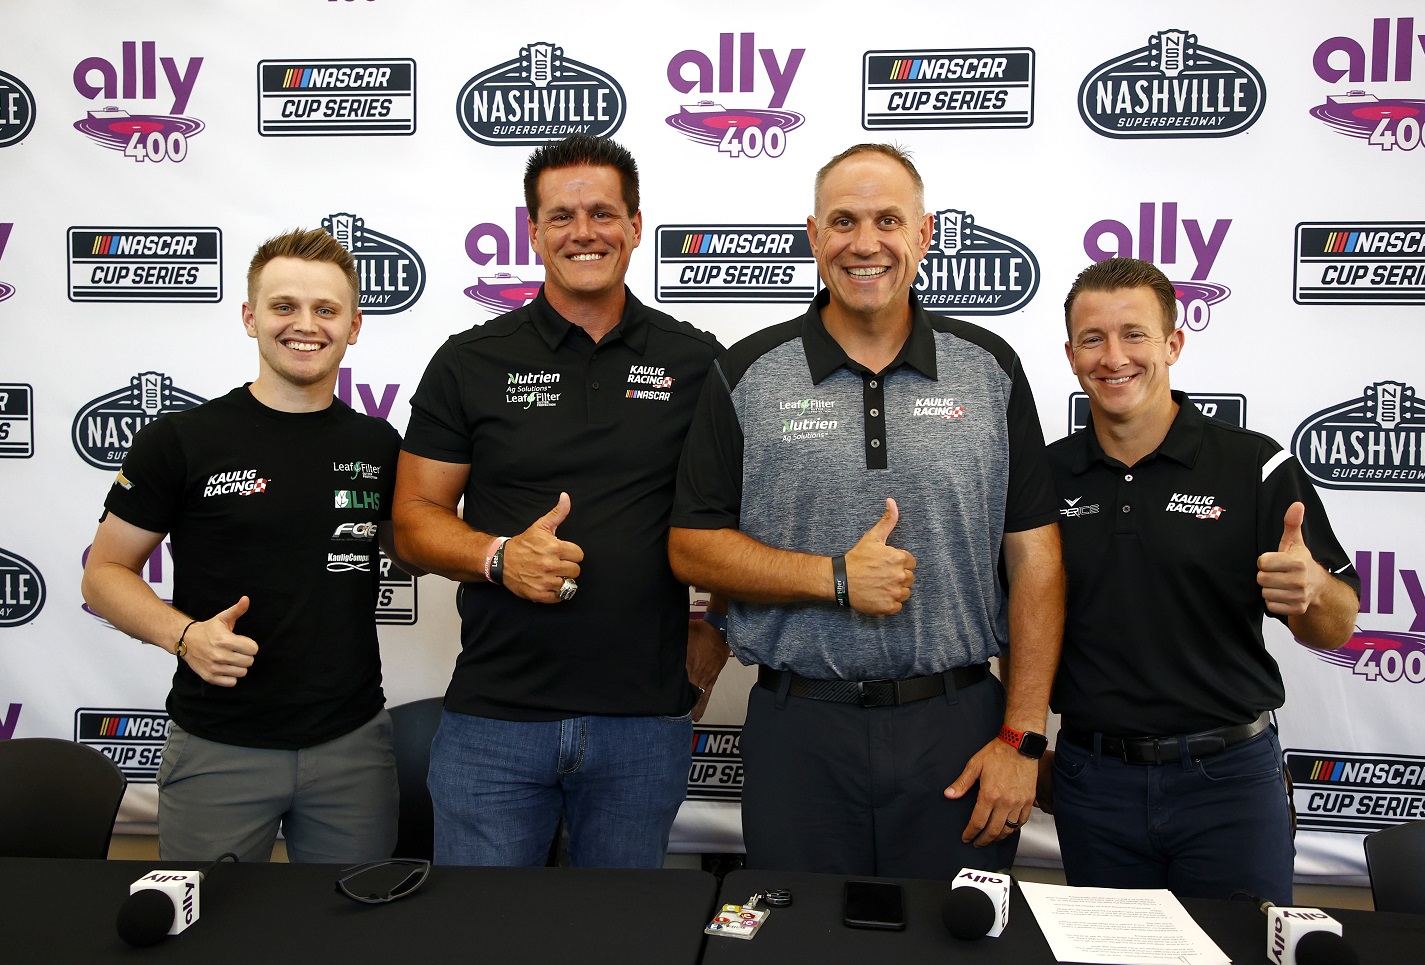 Justin Haley, team owner Matt Kaulig, Kaulig Racing president Chris Rice, and AJ Allmendinger pose for photos after the announcement that Kaulig Racing will race full-time in the NASCAR Cup Series.